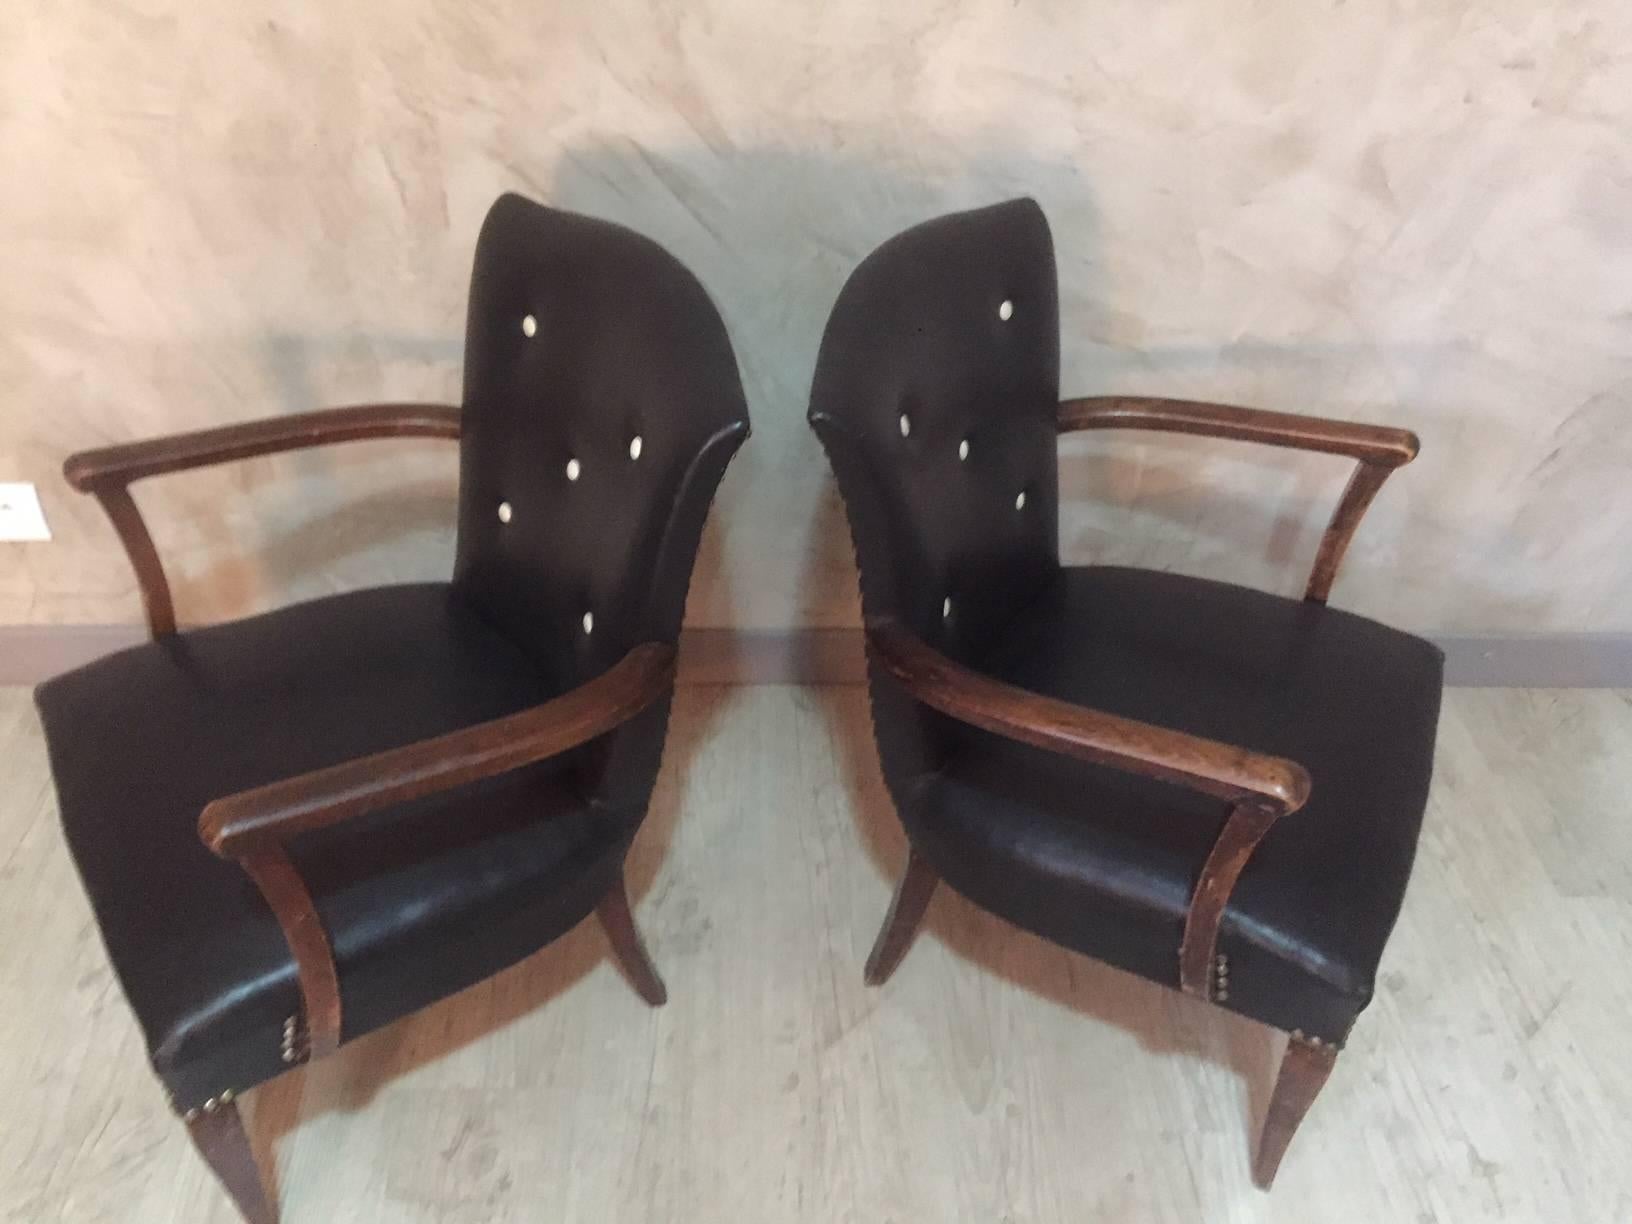 Nice pair of black leatherette lounge chairs from the 1940s. 
Finishing nails.